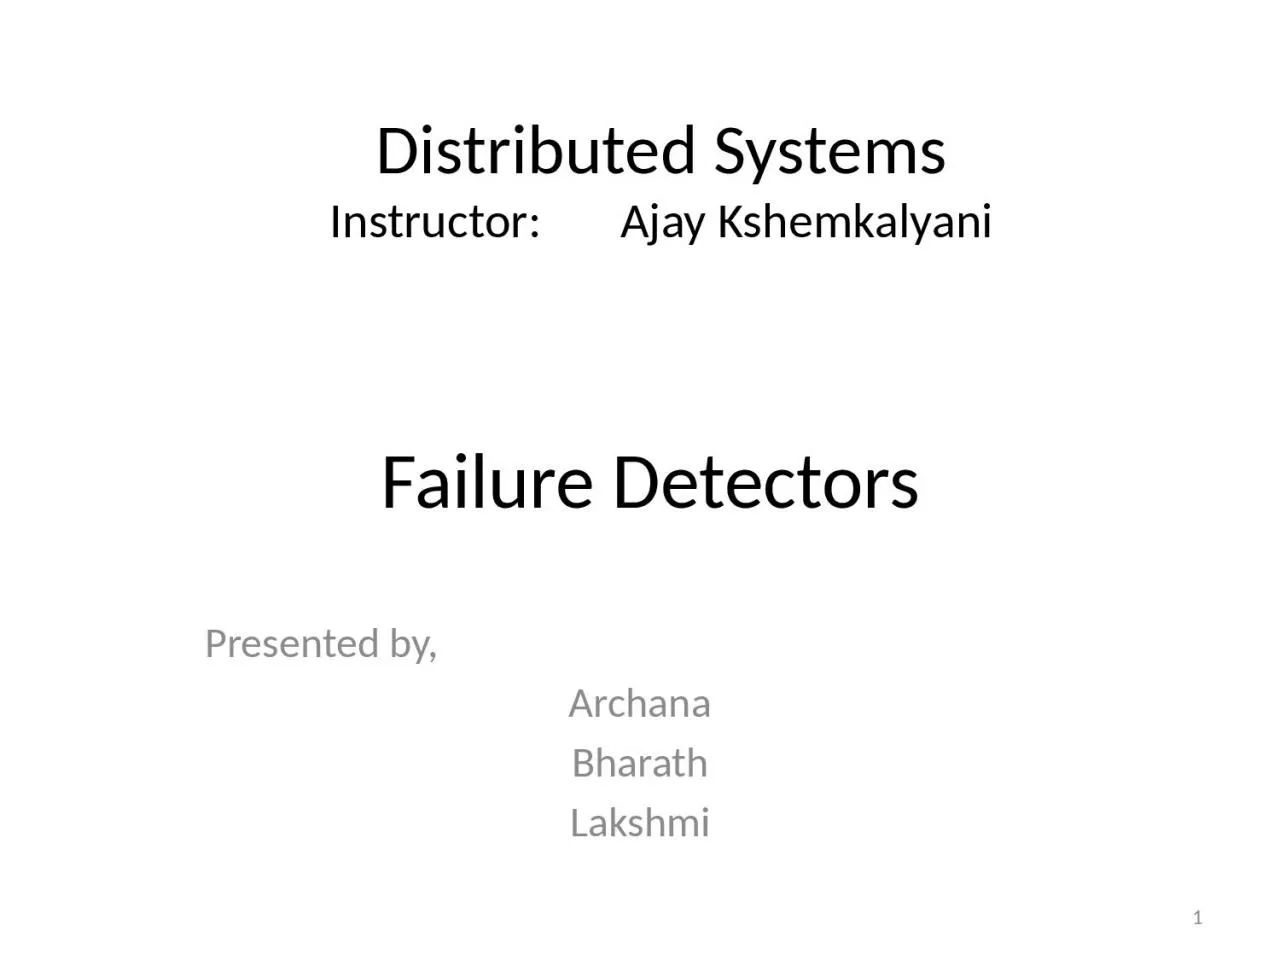 Failure Detectors Presented by,